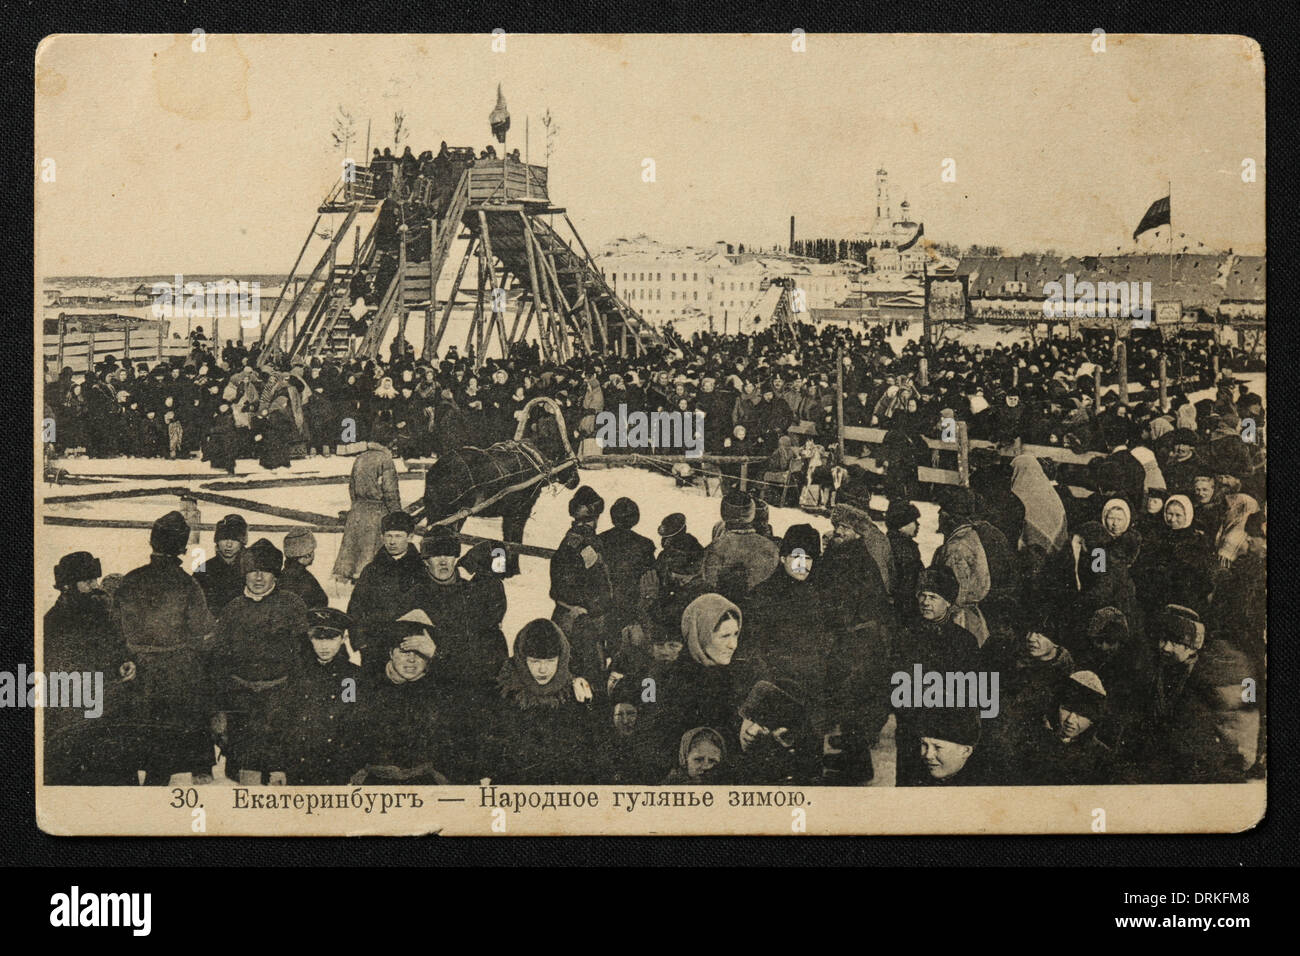 Winter festival in Yekaterinburg, Russian Empire. Black and white vintage photograph by Russian photographer Veniamin Metenkov dated from the beginning of the 20th century issued in the Russian vintage postcard published by Veniamin Metenkov himself in Yekaterinburg. Text in Russian: Yekaterinburg. Winter festival. Courtesy of the Azoor Postcard Collection. Stock Photo